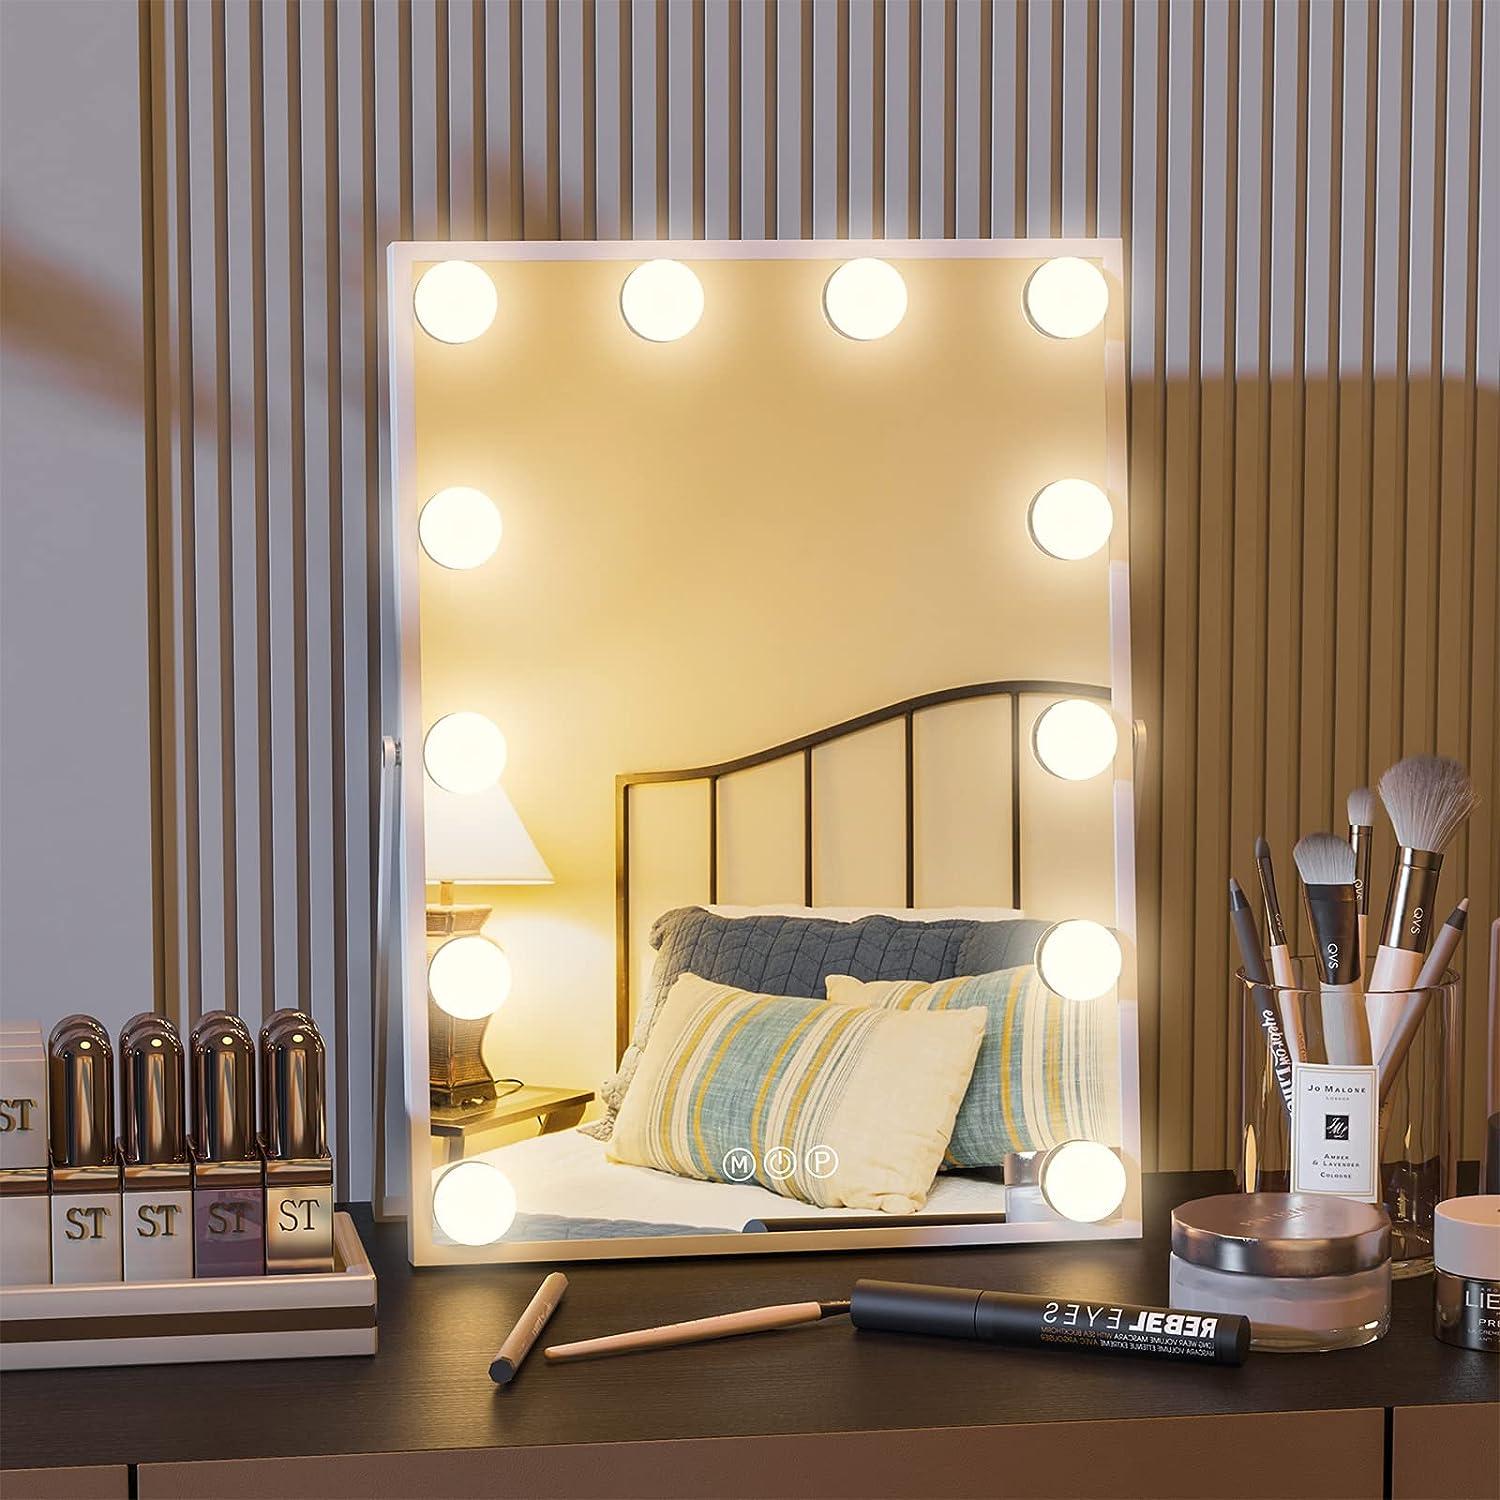 Makeup mirror with lights: how to choose the best one - Cantoni